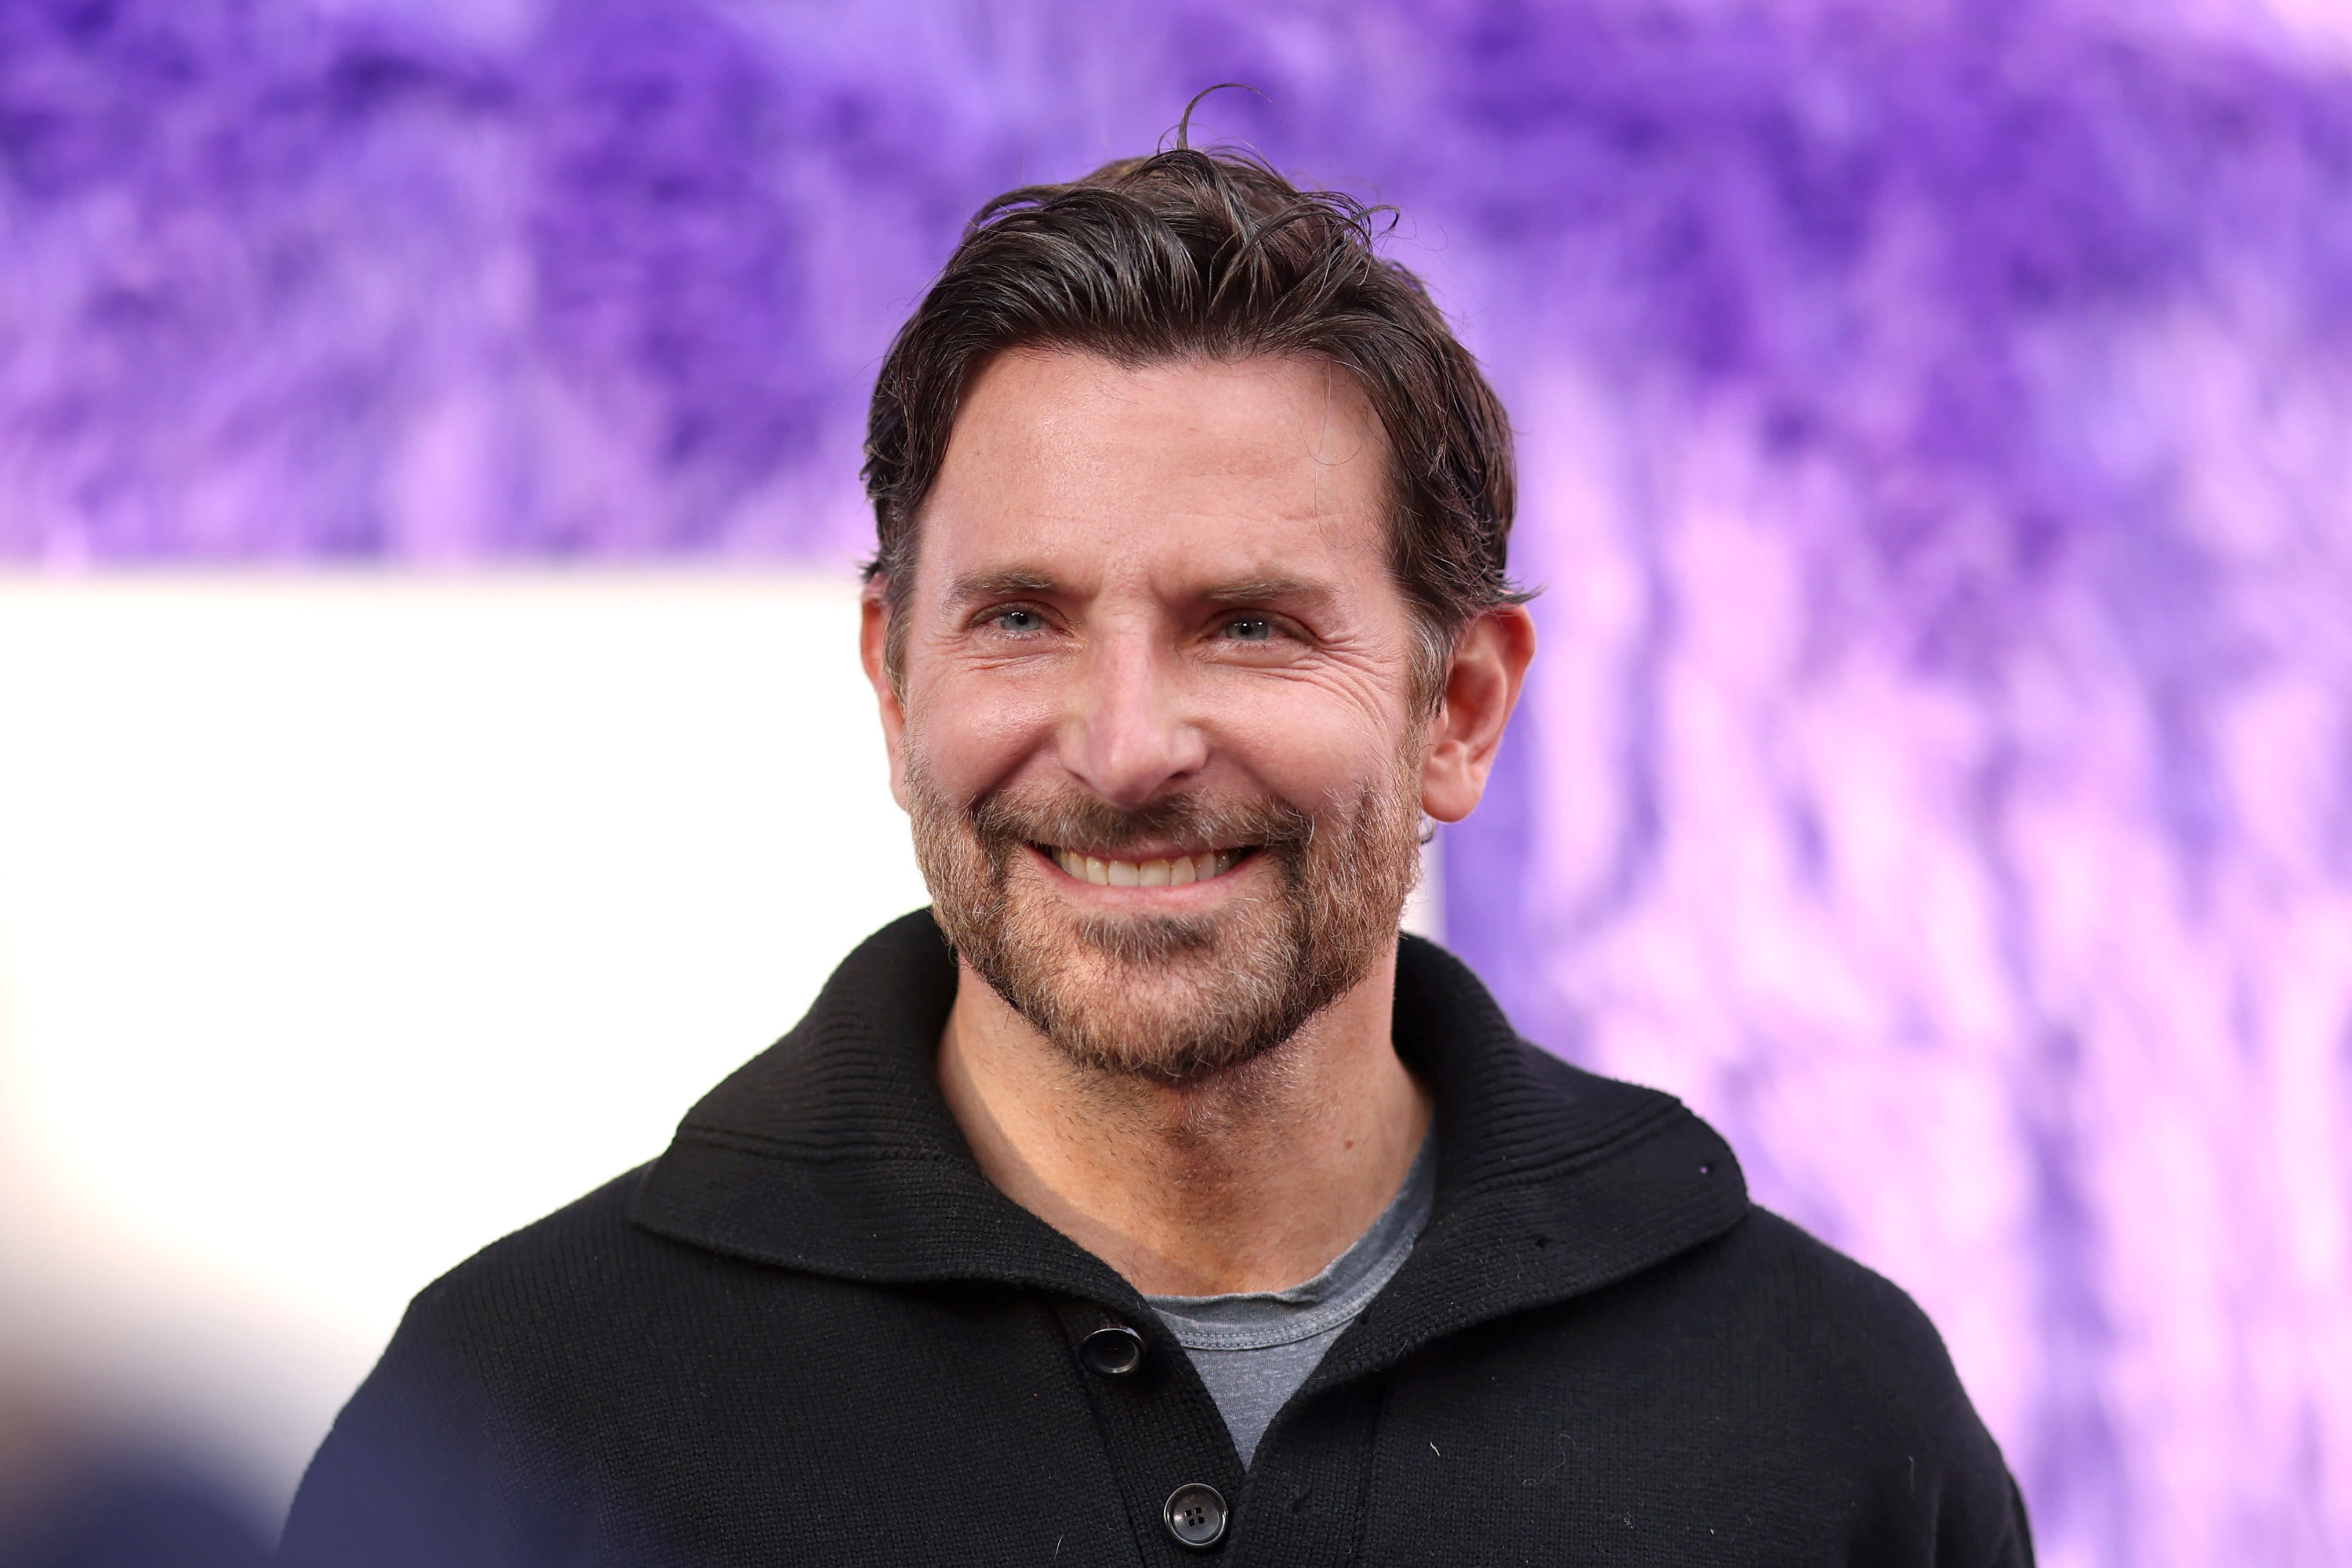 Bradley Cooper’s Daughter Recognizes Her Dad Even in Purple-Monster Form on the Red Carpet